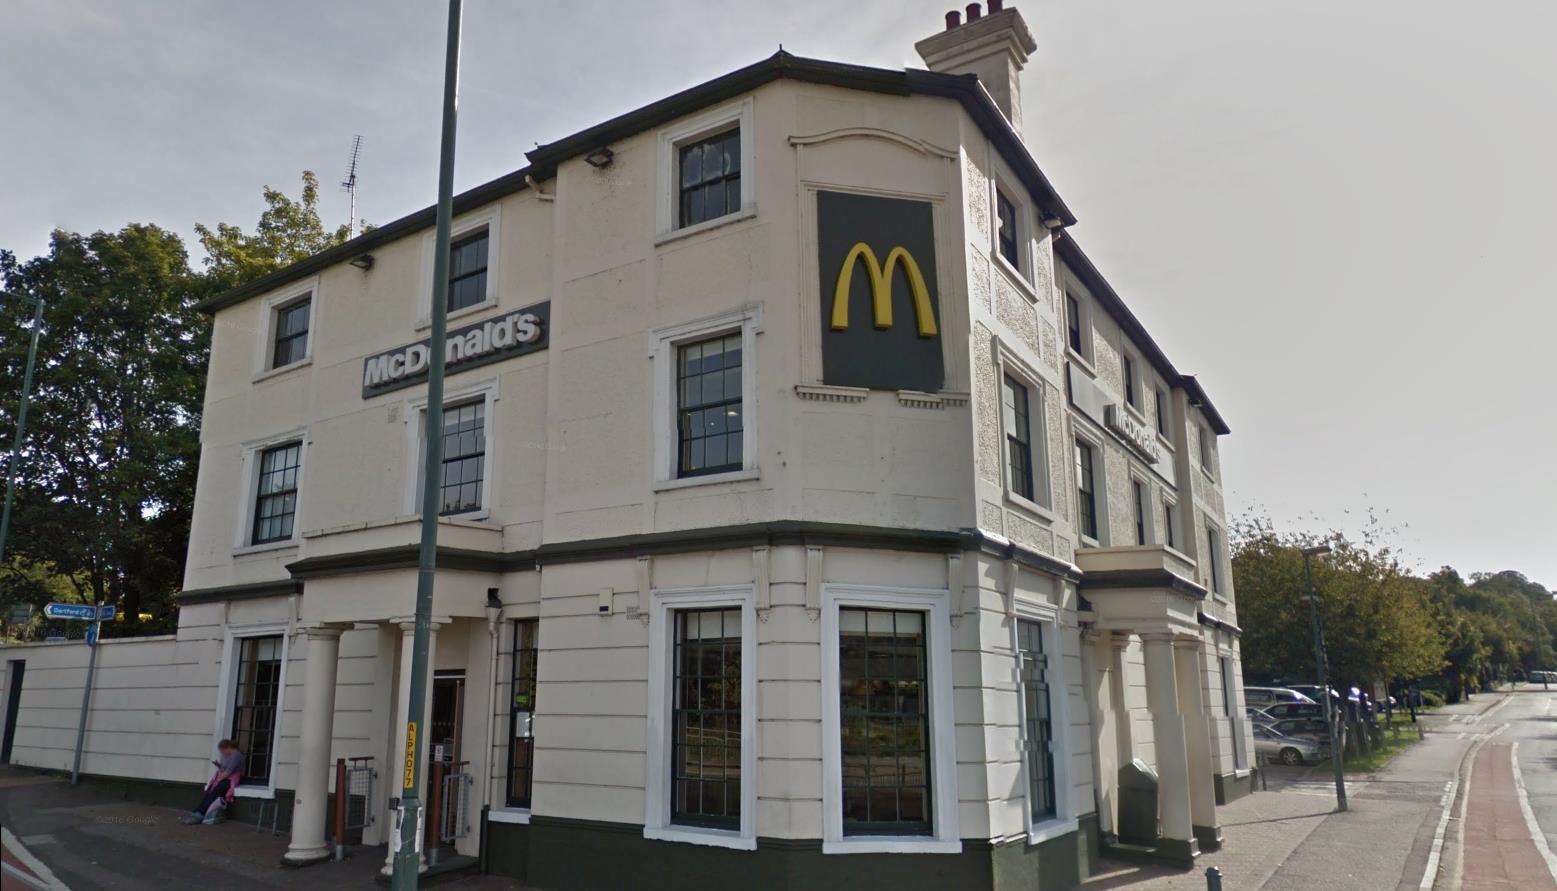 McDonald's have submitted an application seeking permission from Dartford council to add a drive thru lane to its premises.